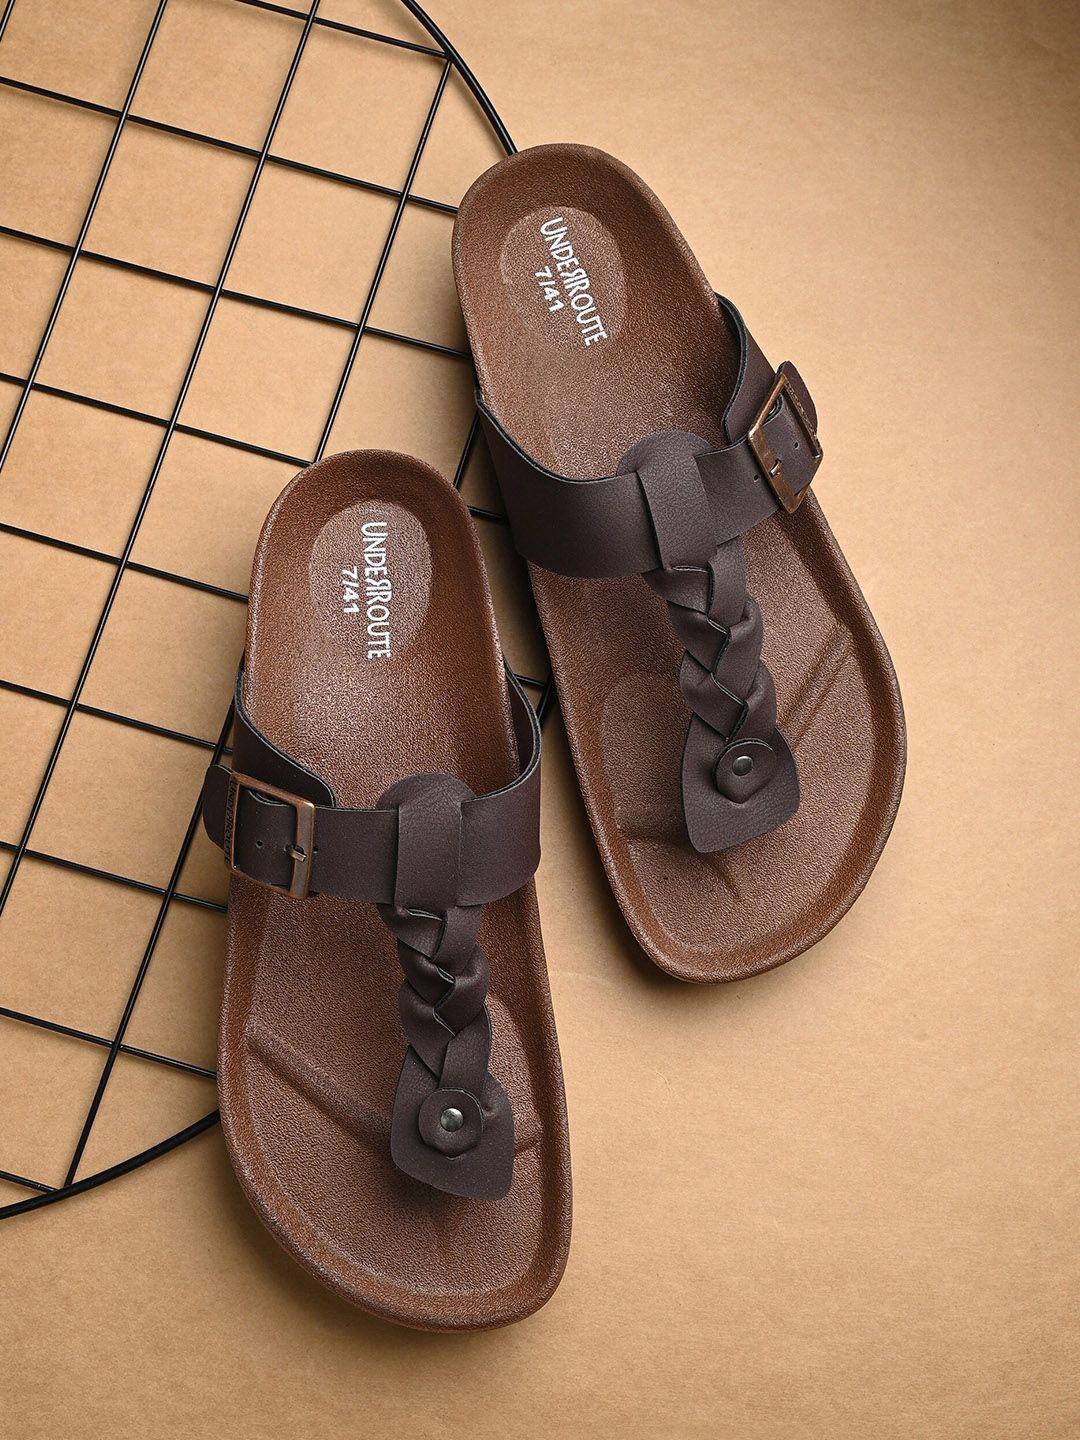 UNDERROUTE Men Braided Comfort Sandals With Buckle Detail